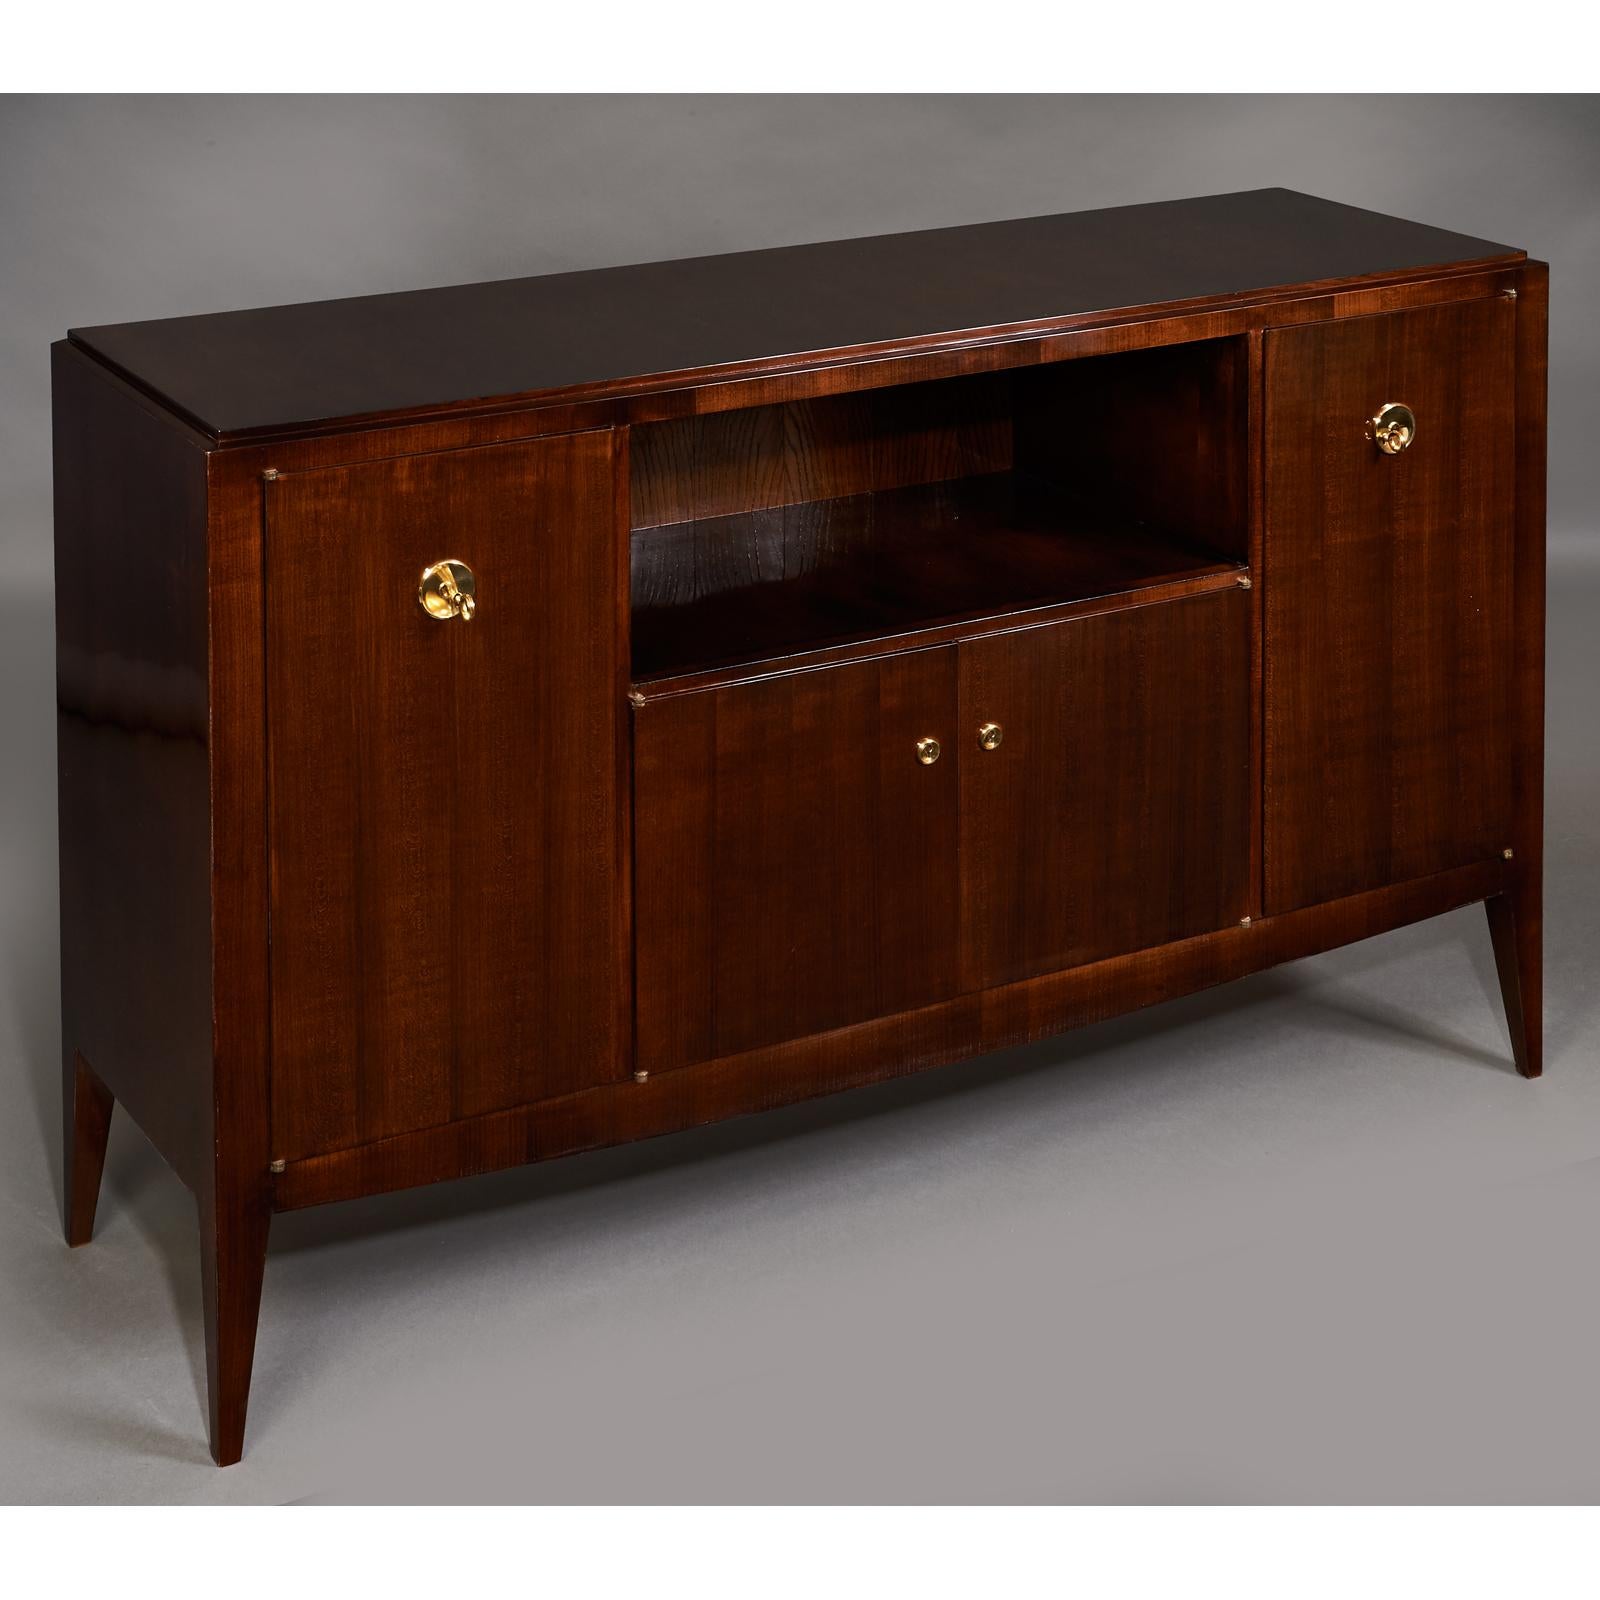 Jules Deroubaix (1904-1979)
An elegant four door cabinet in mahogany stained fruitwood with central open niche,
polished brass mounts.
Signed, maker's stamp on back
France, 1950s
Dimensions: 59 W x 18.5 D x 37 H.
 